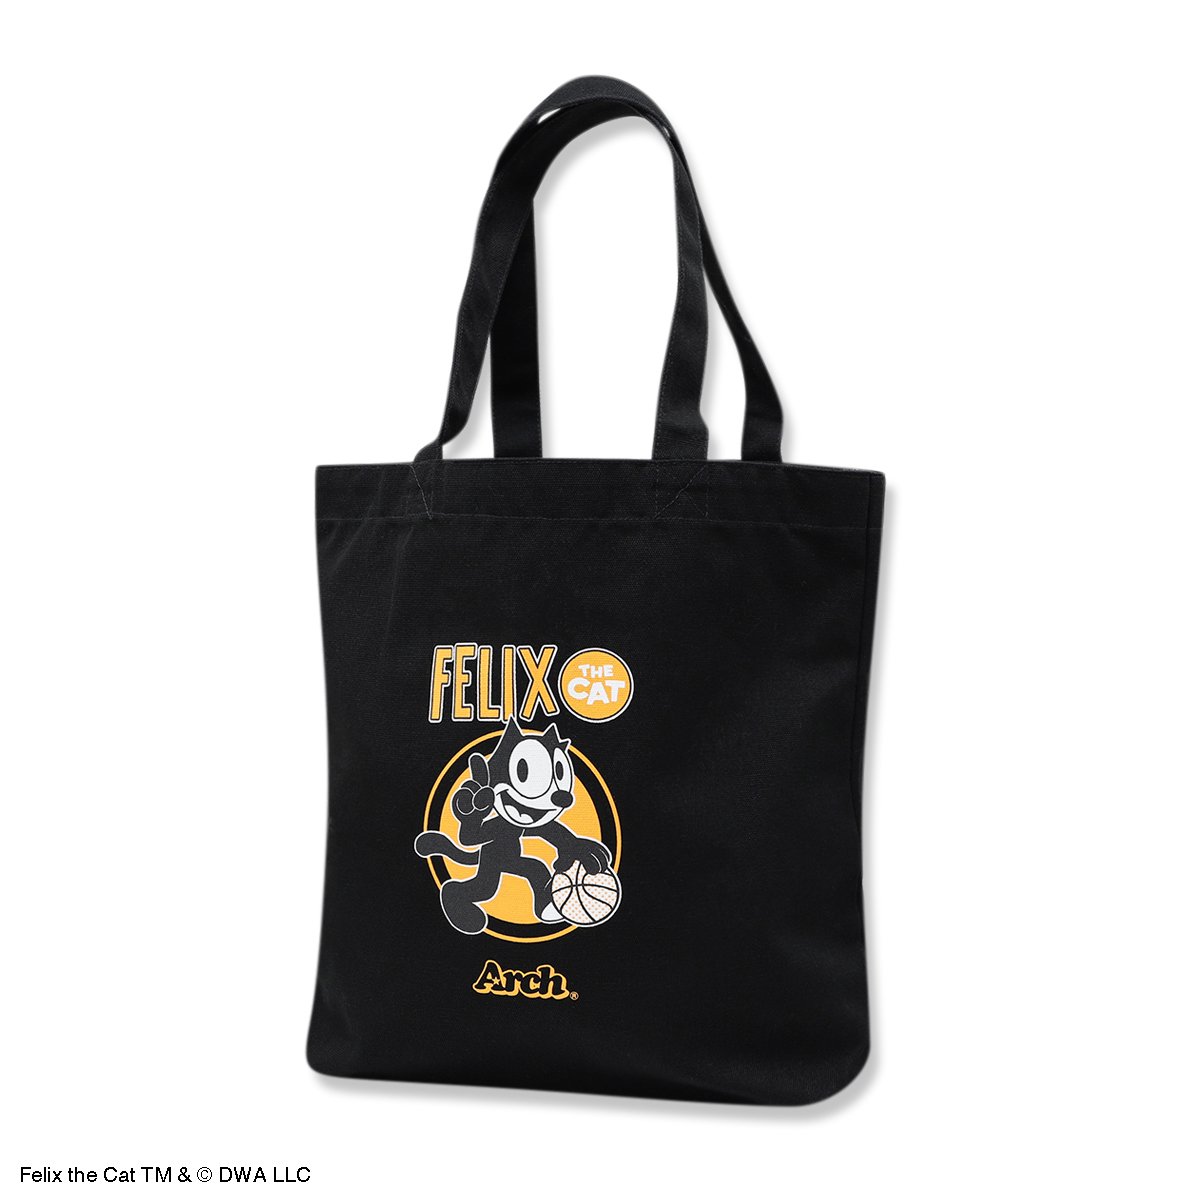 FELIX THE CAT | Arch playmaker tote bag【black】 - Arch ☆ アーチ 